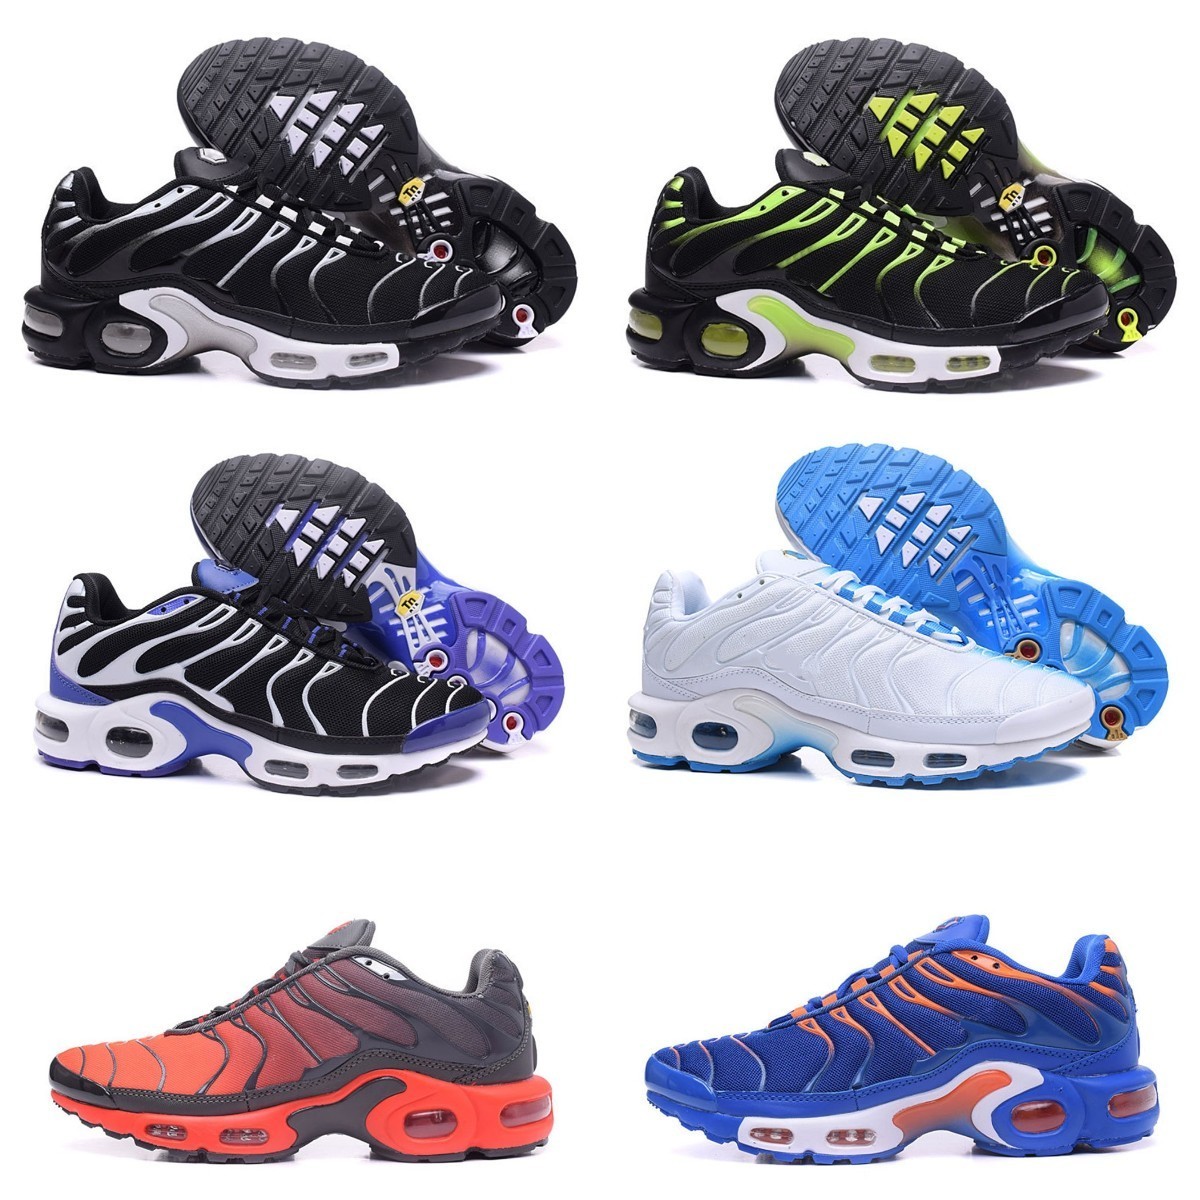 

2022 Mens Tn Running Casual Shoes Tns OG Triple Black White Be True Max Plus Ultra Seafoam Grey Frost Teal Volt Blue Crinkled Metal Unite Camo Requin Designer Sneakers, Please contact us